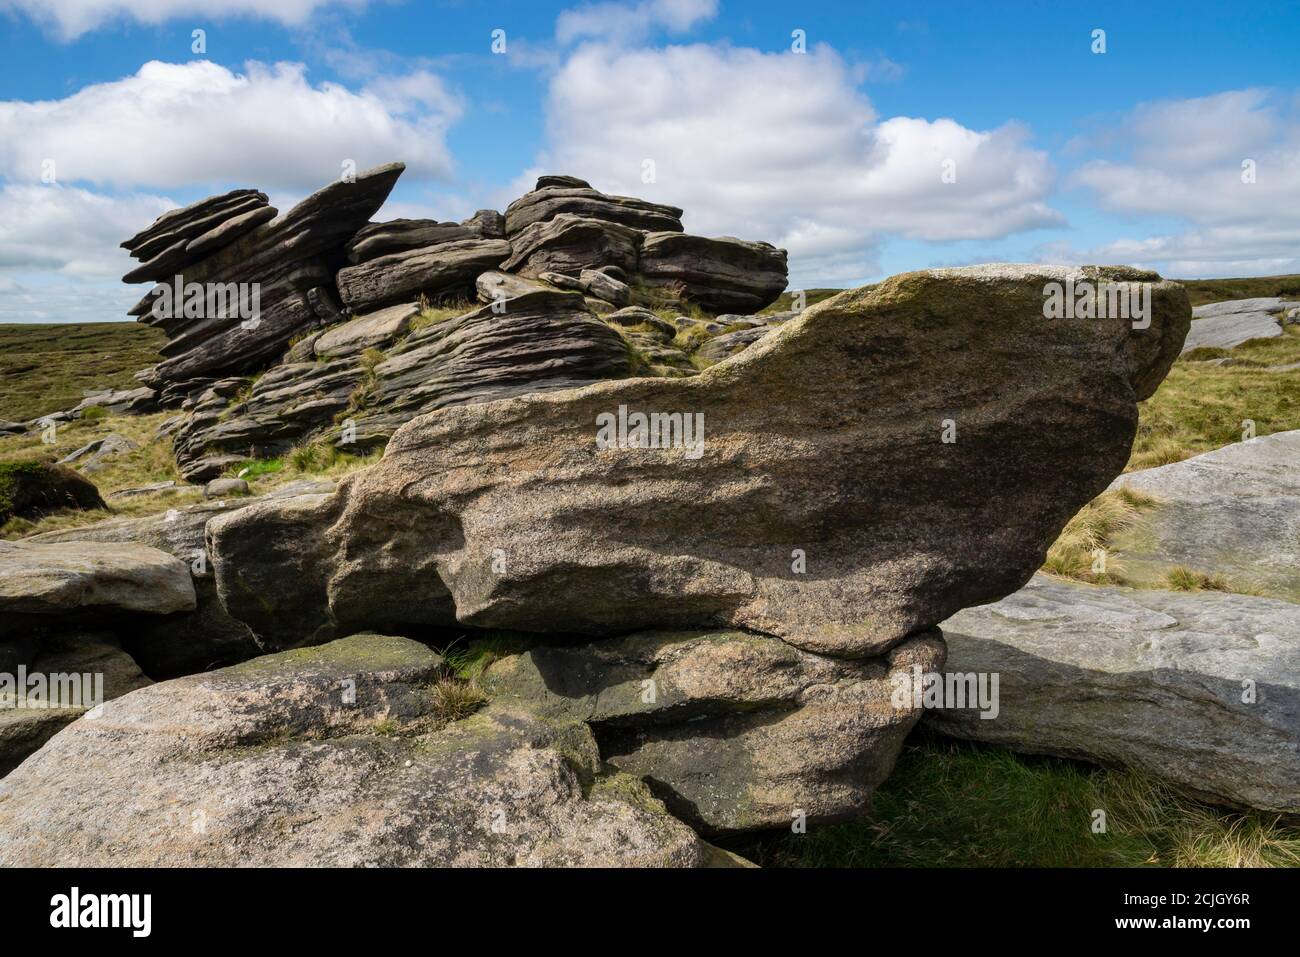 Gritstone outcrop at Fairbrook Naze on the northern edge of Kinder Scout in the Peak District national park, Derbyshire, England Stock Photo